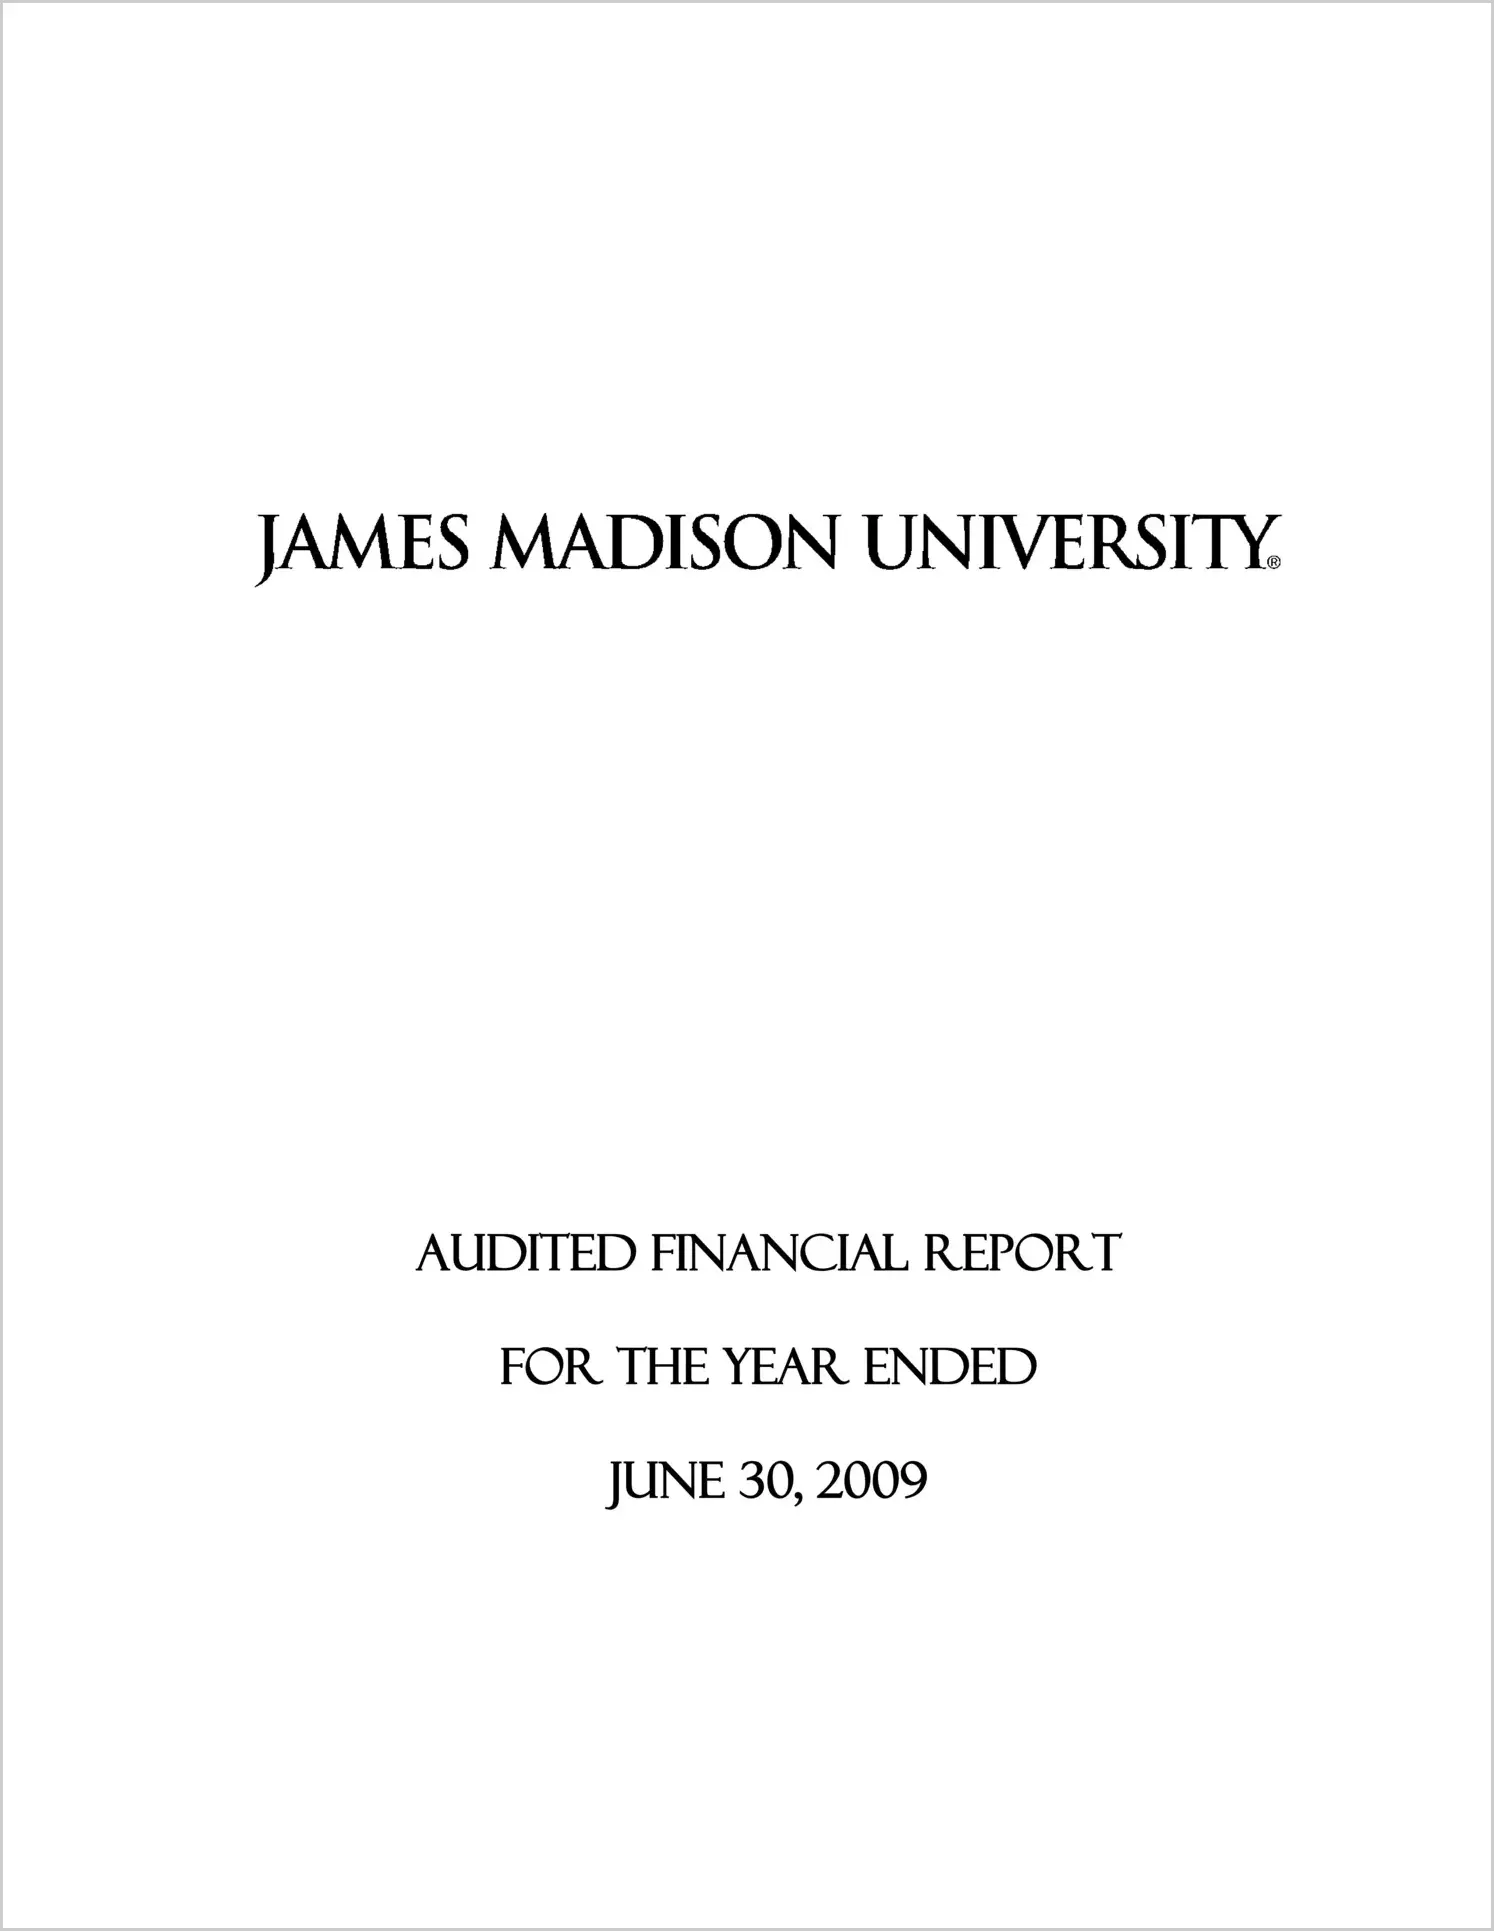 James Madison University Financial Statements for the year ended June 30, 2009